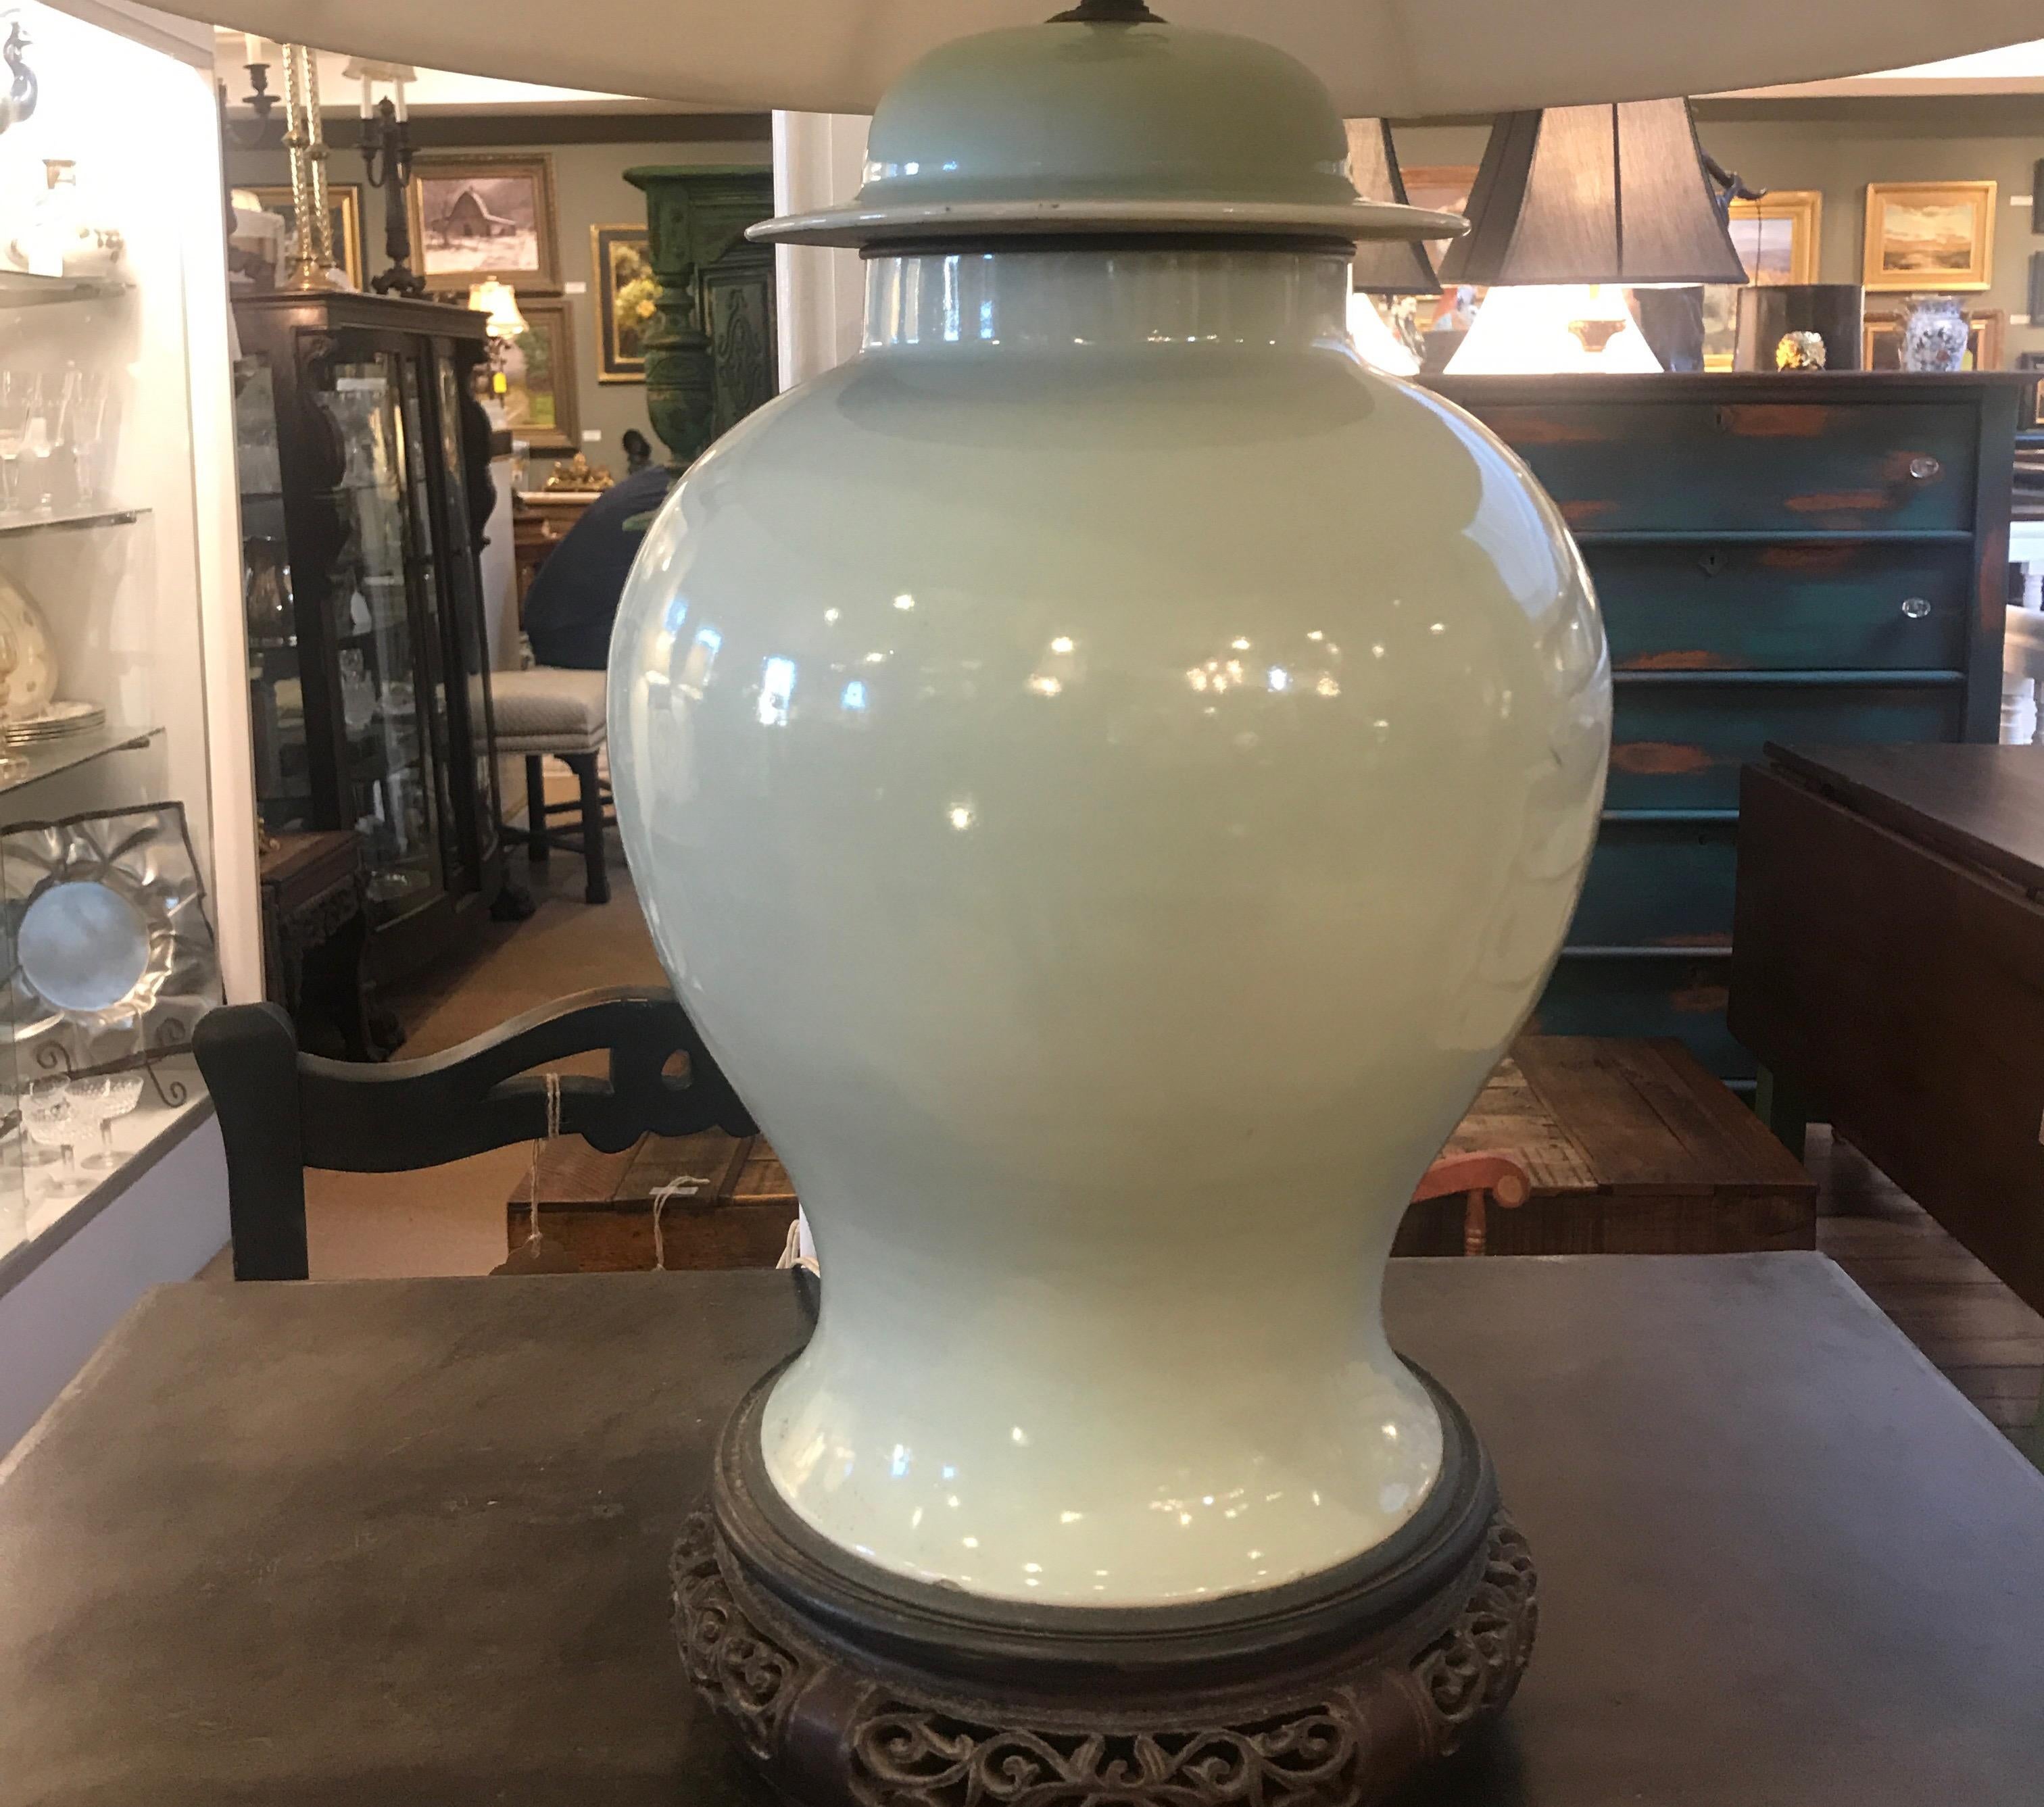 An very early Chinese celadon porcelain jar with hand carved hardwood base, now as a lamp,. The pale celadon from the early part of the 19th century or earlier with a fine carved hardwood base. Lamped in the early part of the 20th century. The shade